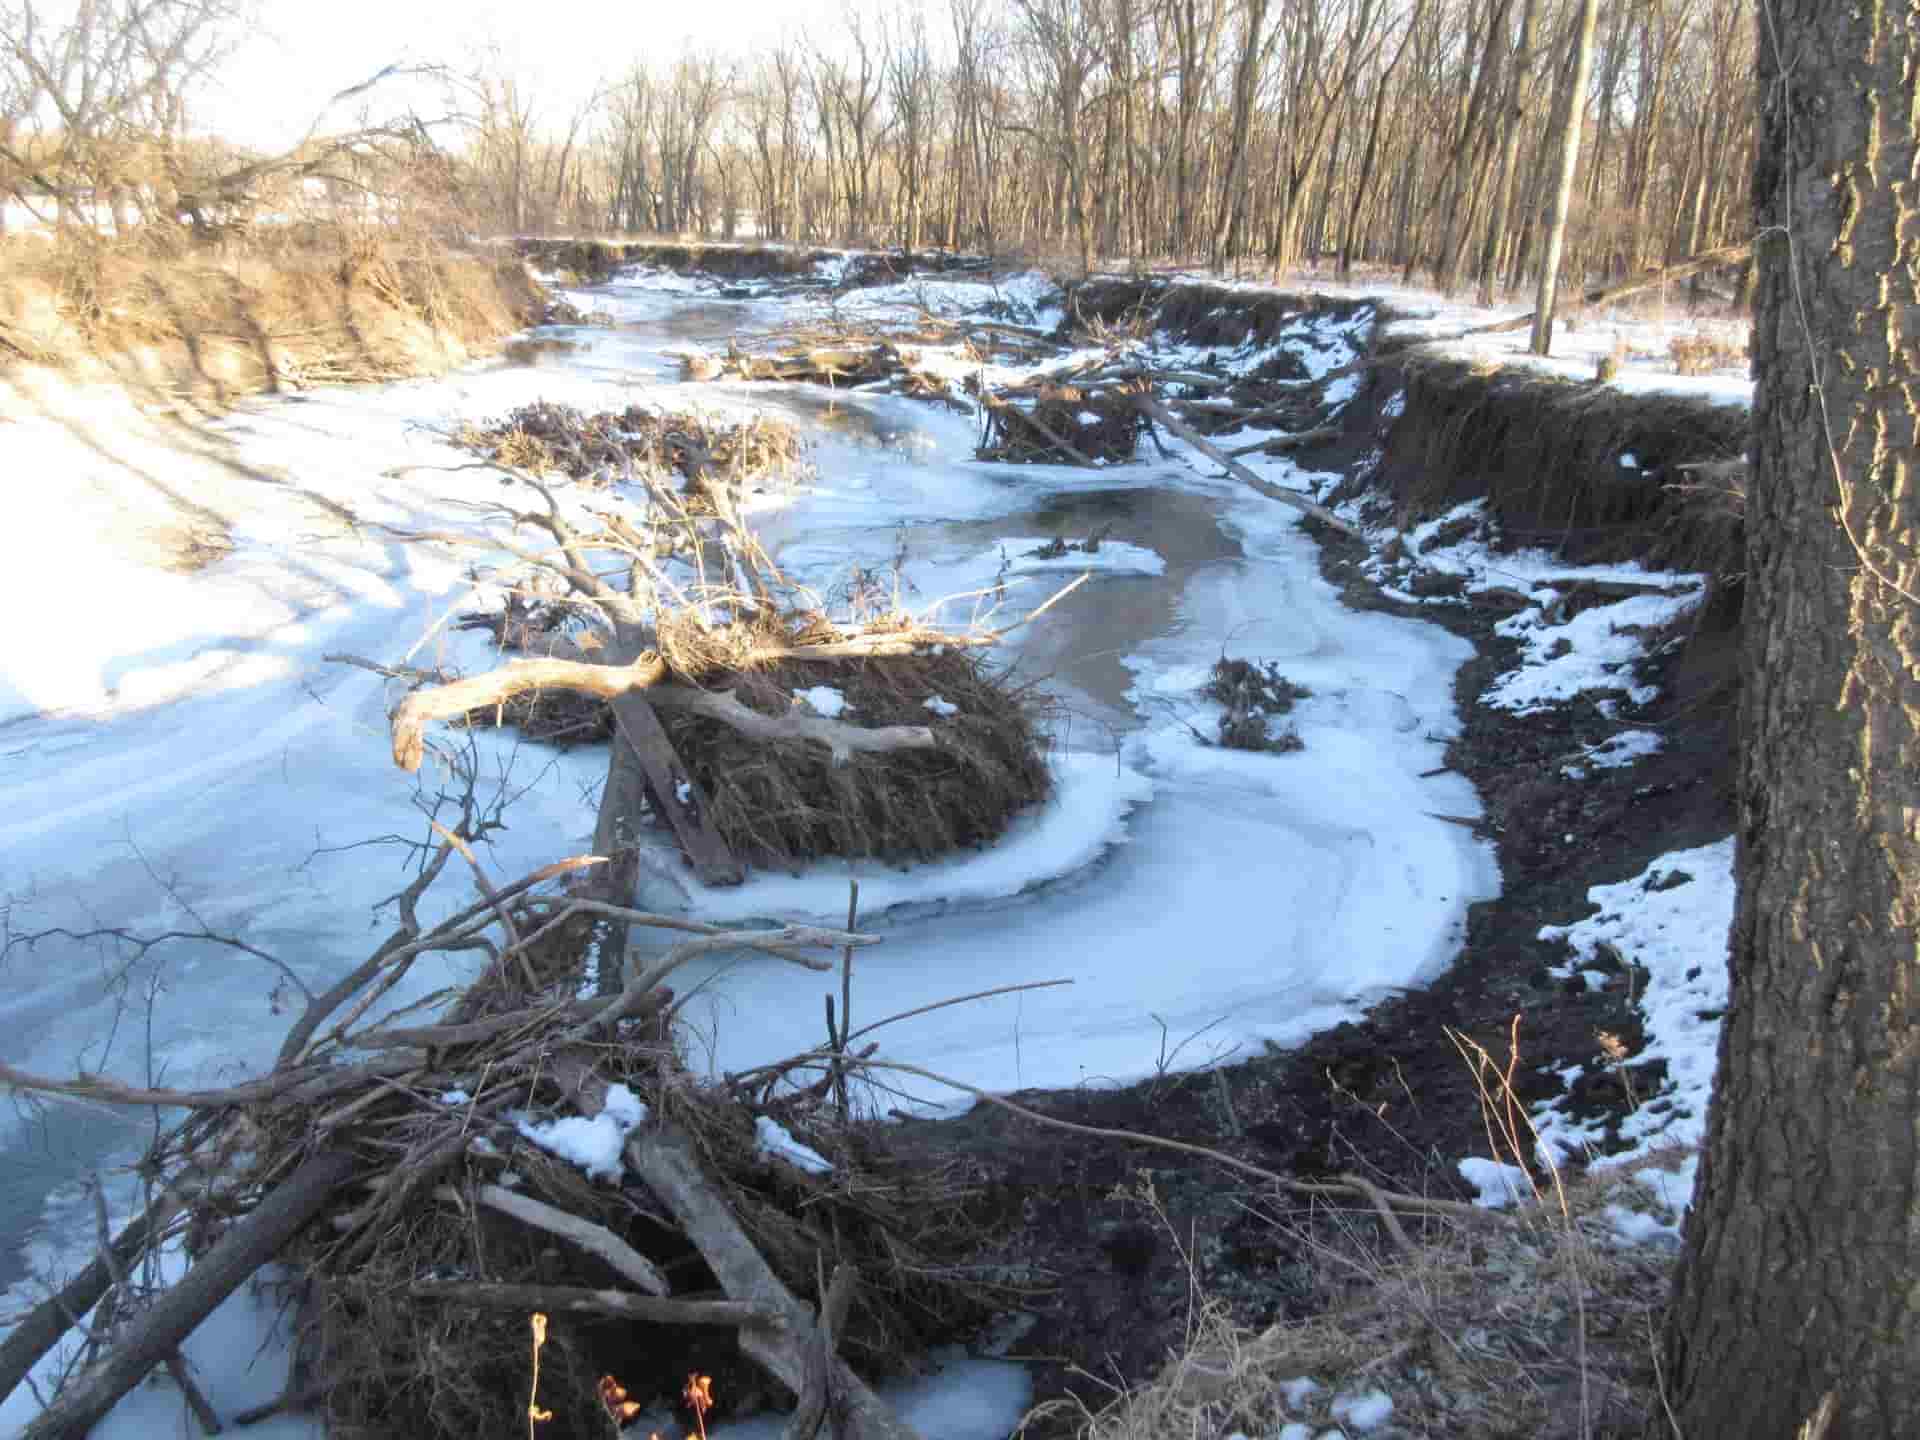 "Before" picture: Snow over an impacted stream with broken trees